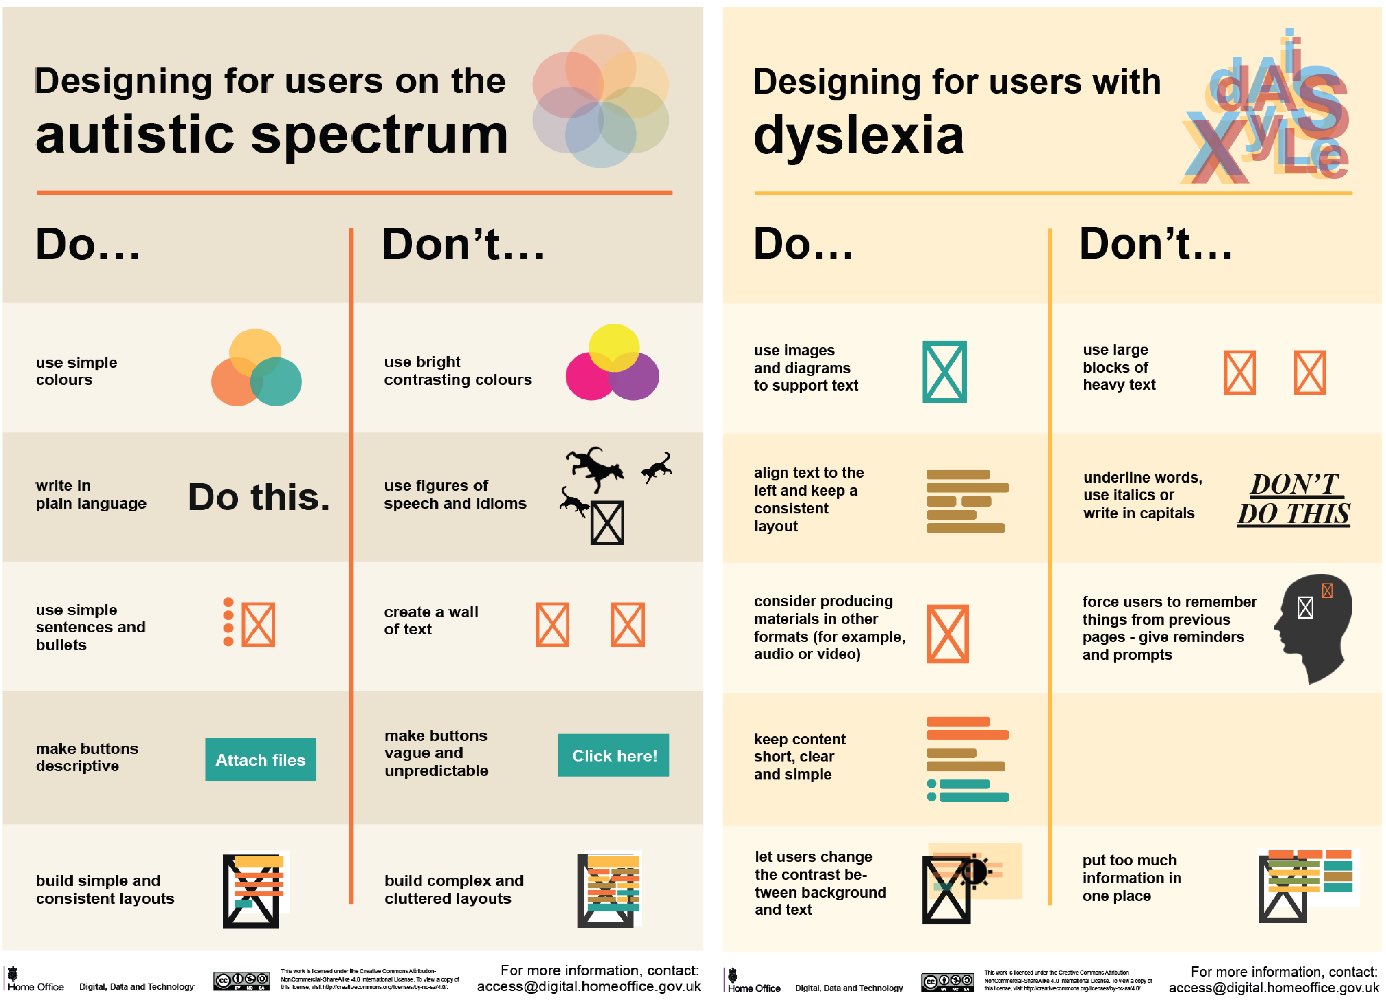 Posters showing the dos and don'ts of designing for users with accessibility needs including autism, and dyslexia.